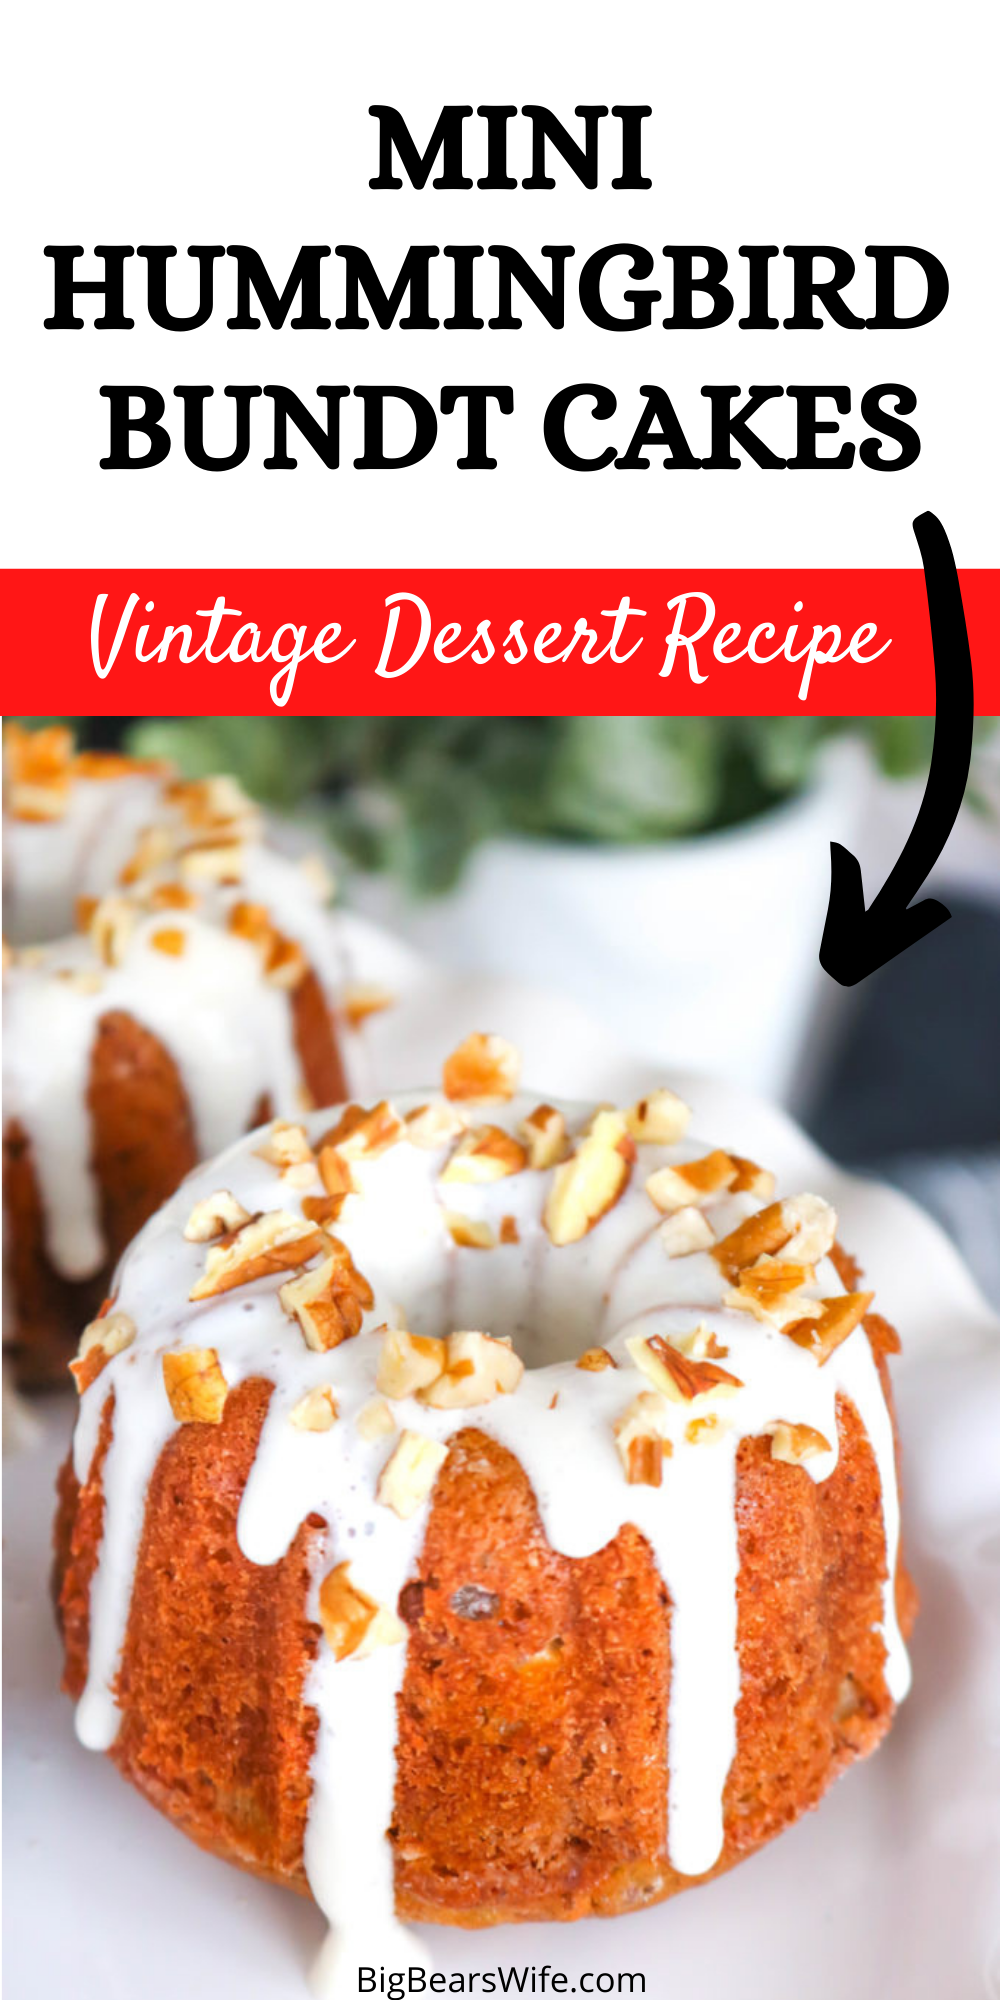 Stuffed with bananas, pecans, and pineapple these Hummingbird Mini Bundt Cakes make for a wonderful Easter dessert, a church potluck or Mother’s Day brunch. This southern classic has been turned into divine individual dessert with a mini bundt pan.  via @bigbearswife